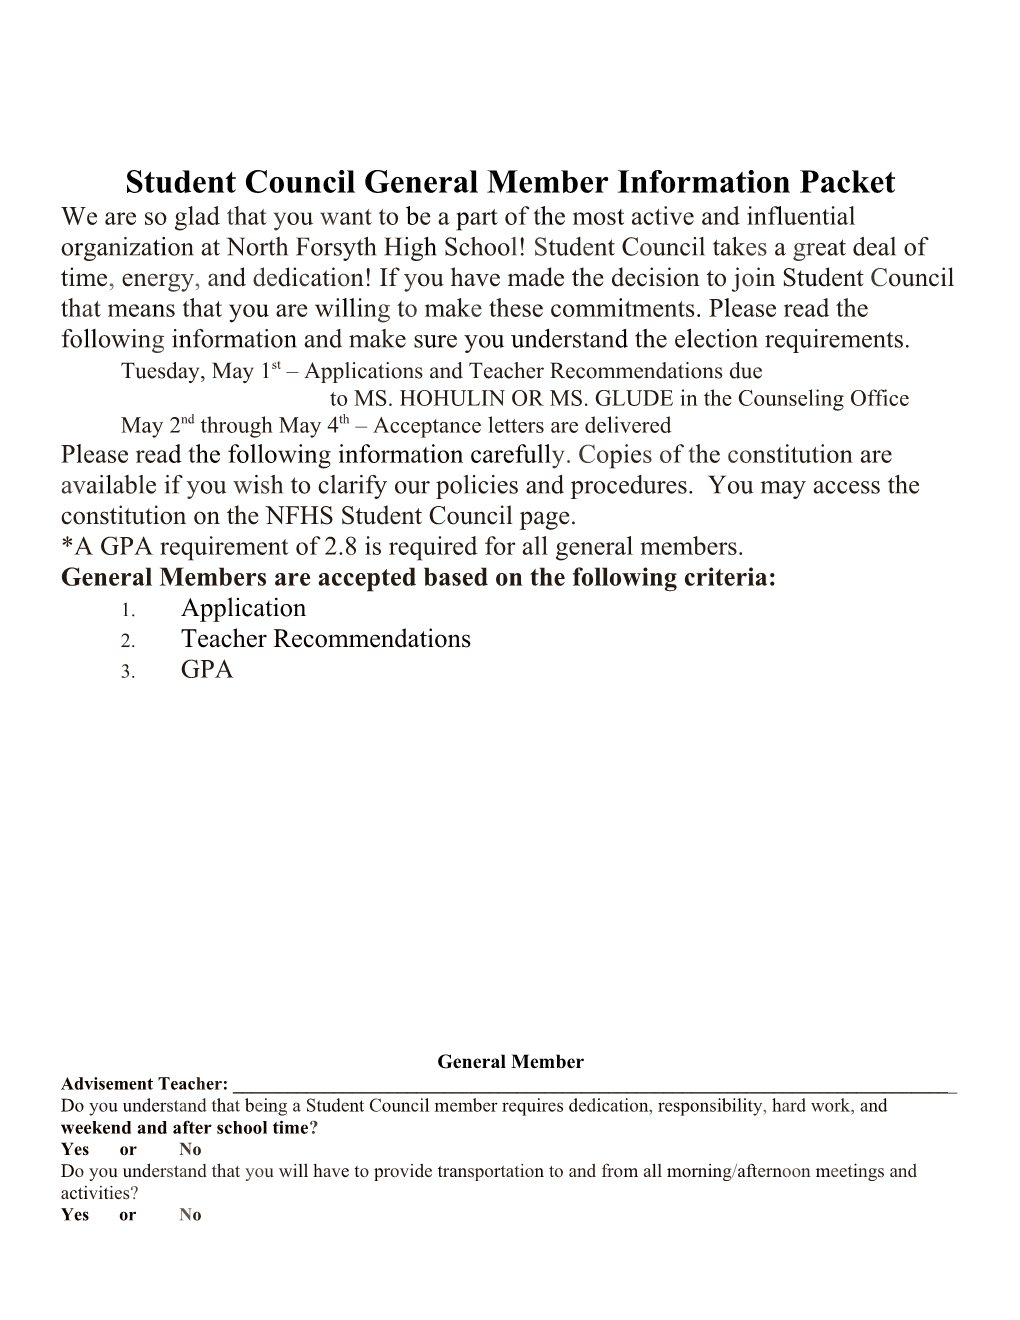 Student Council Election Information Packet